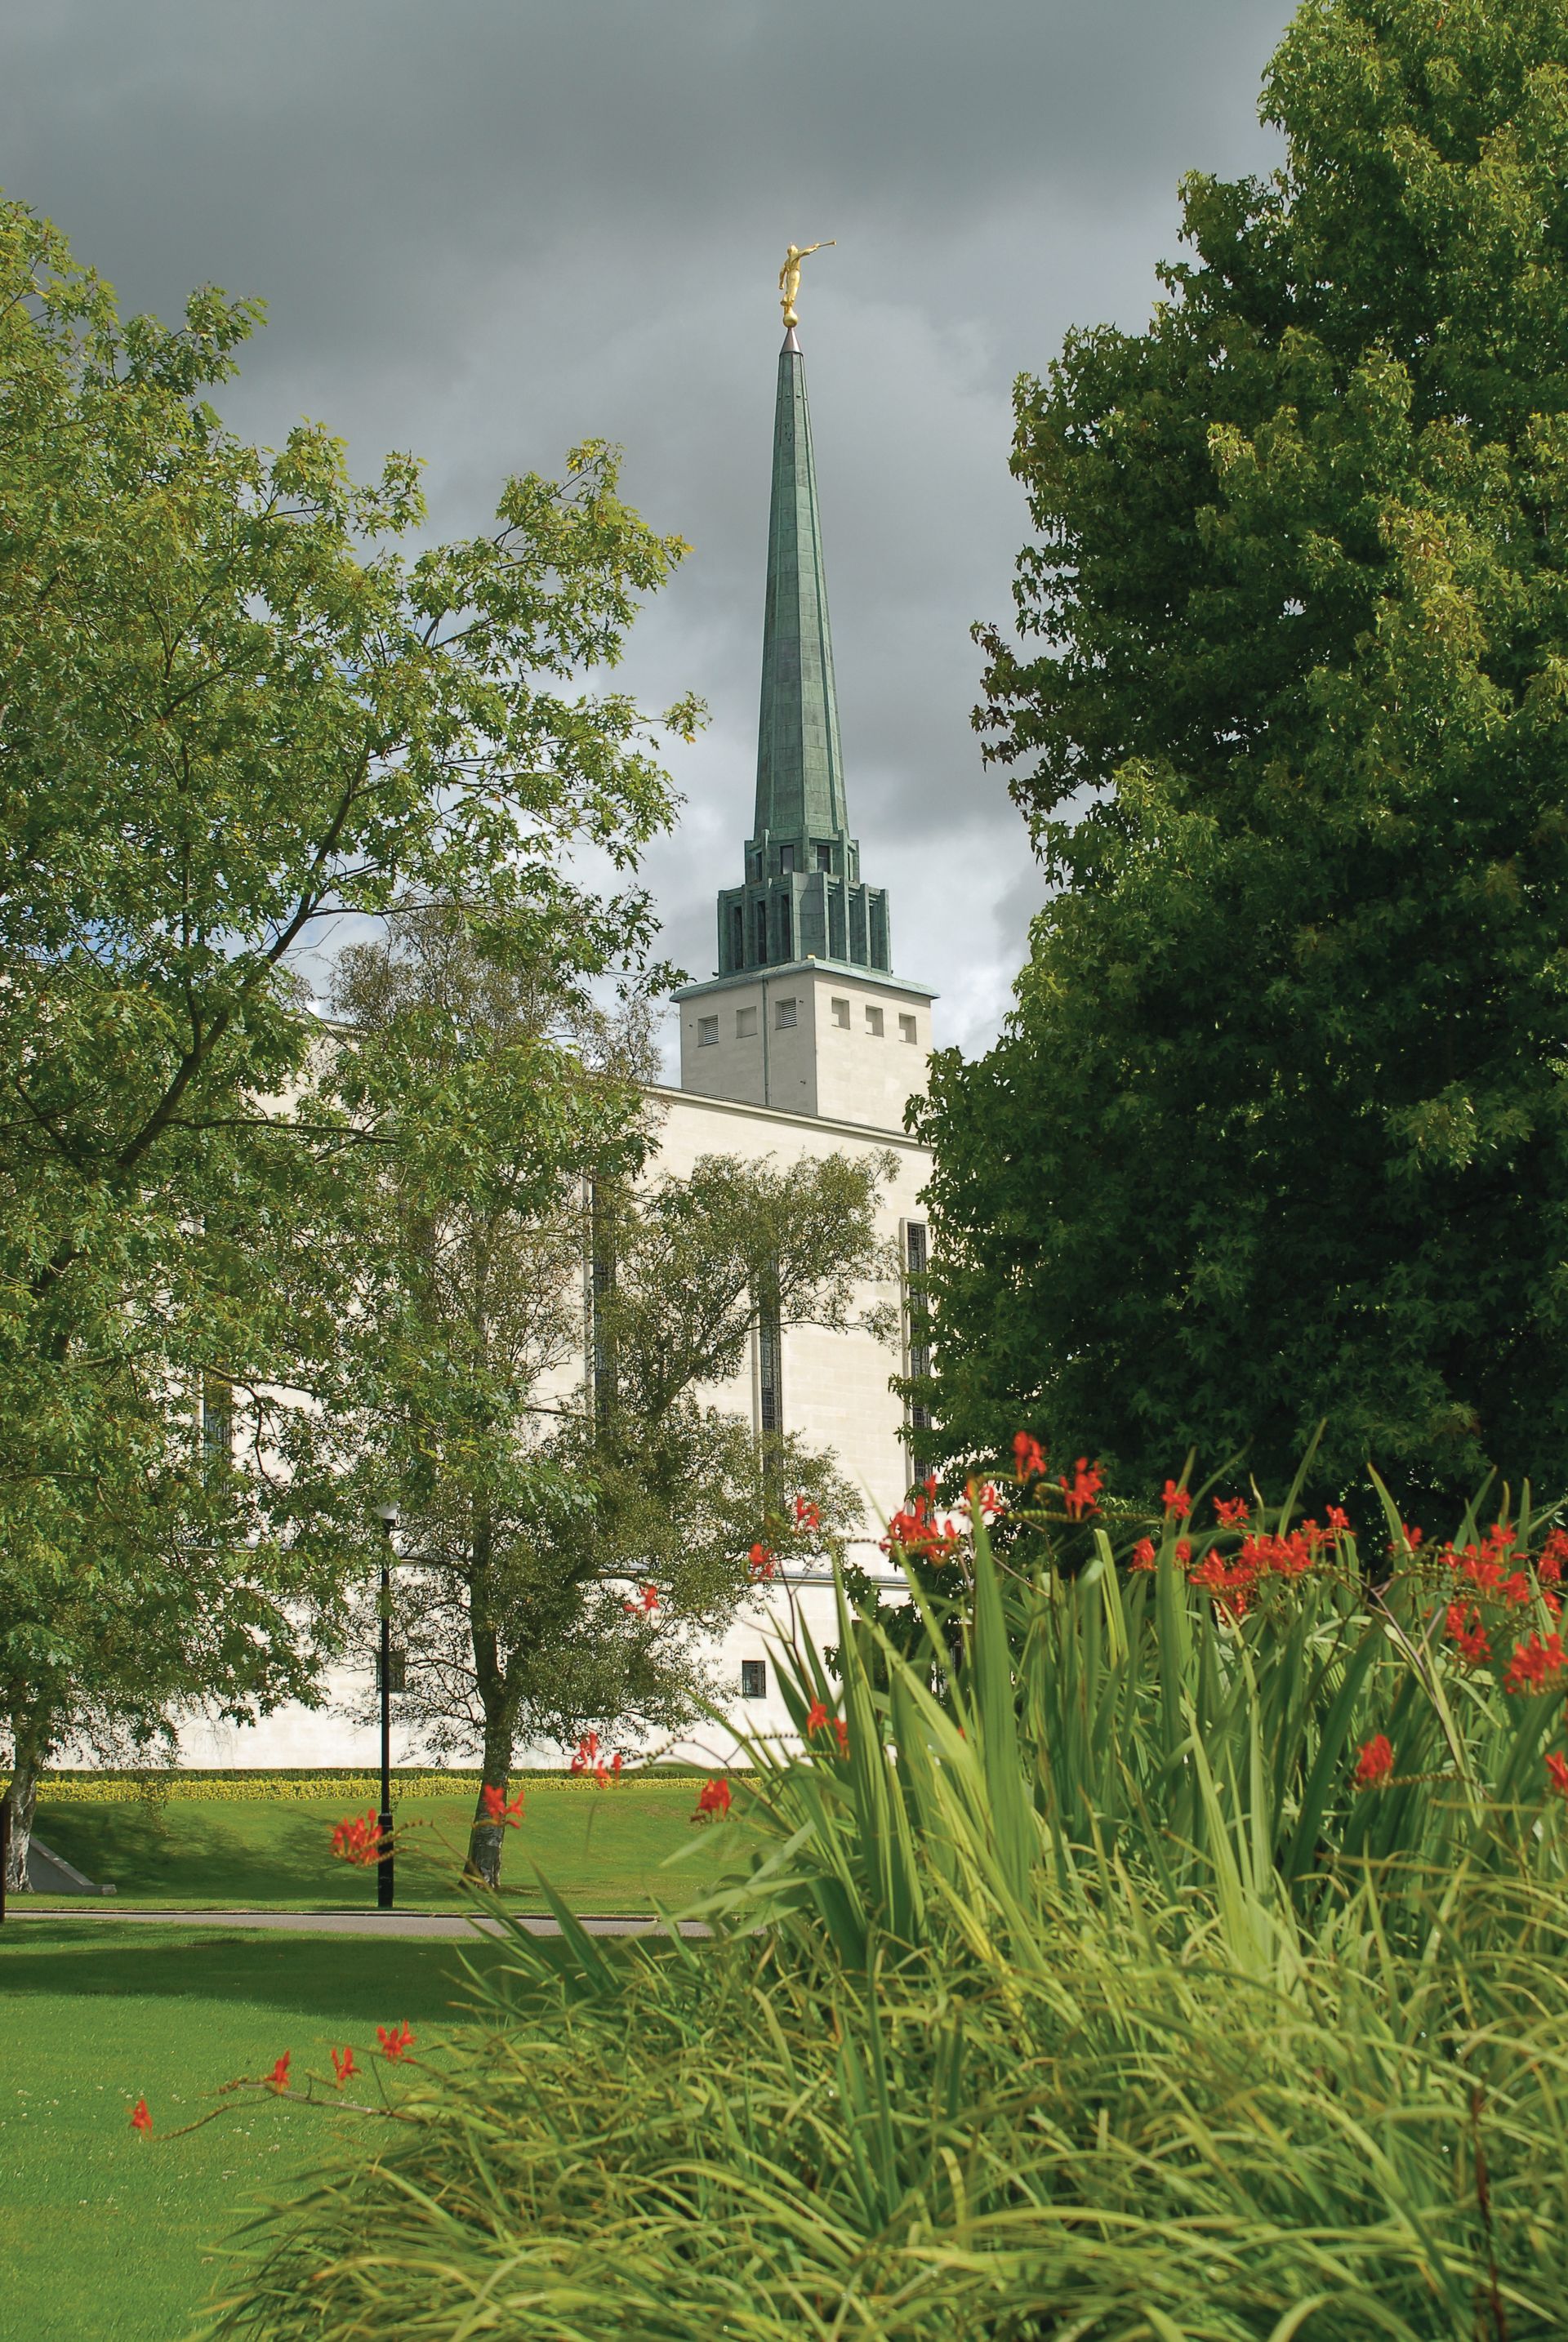 The London England Temple spire, including scenery.